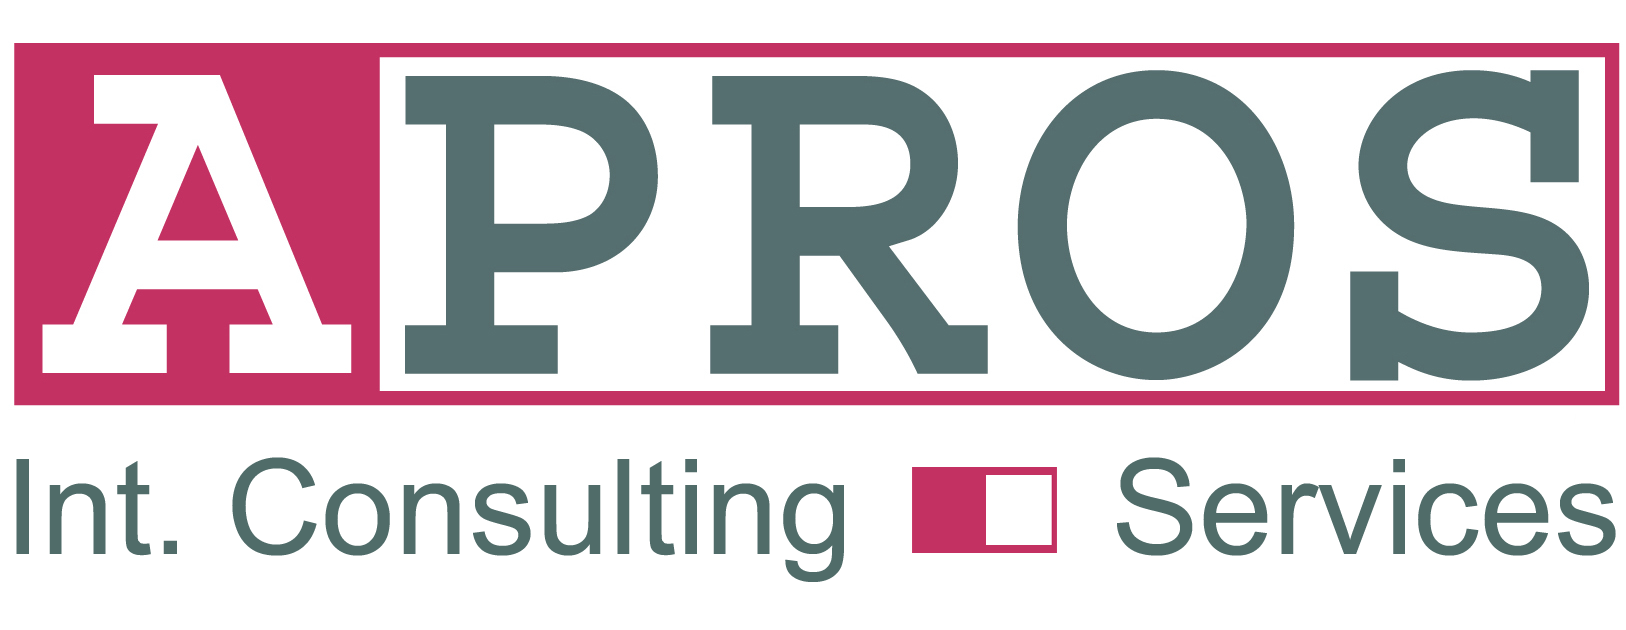 APROS-Services